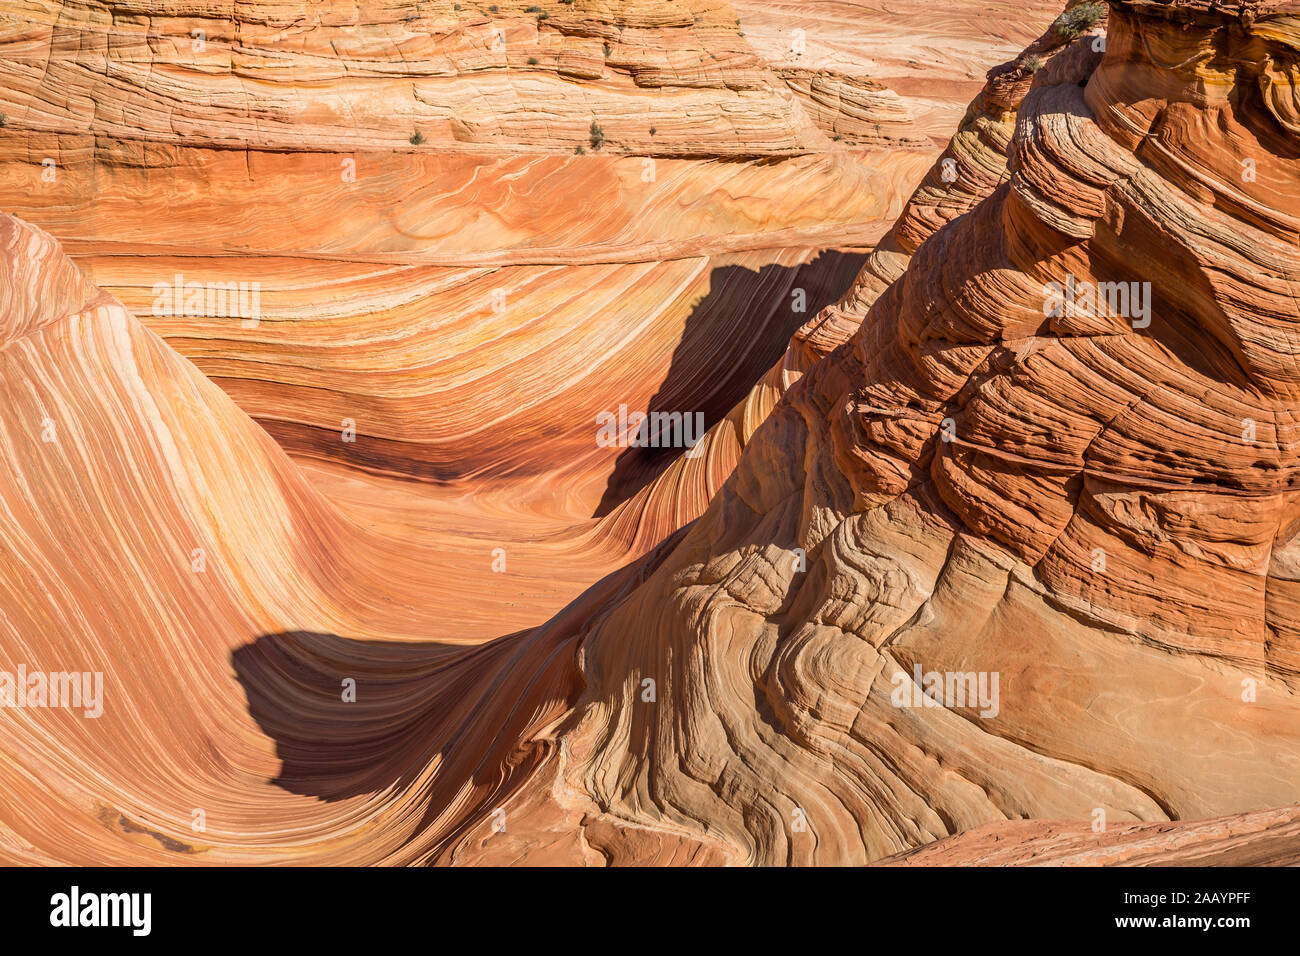 Sandstone towers and valley of the Wave formation that is infamously difficult to obtain a permit and hike to. Stock Photo